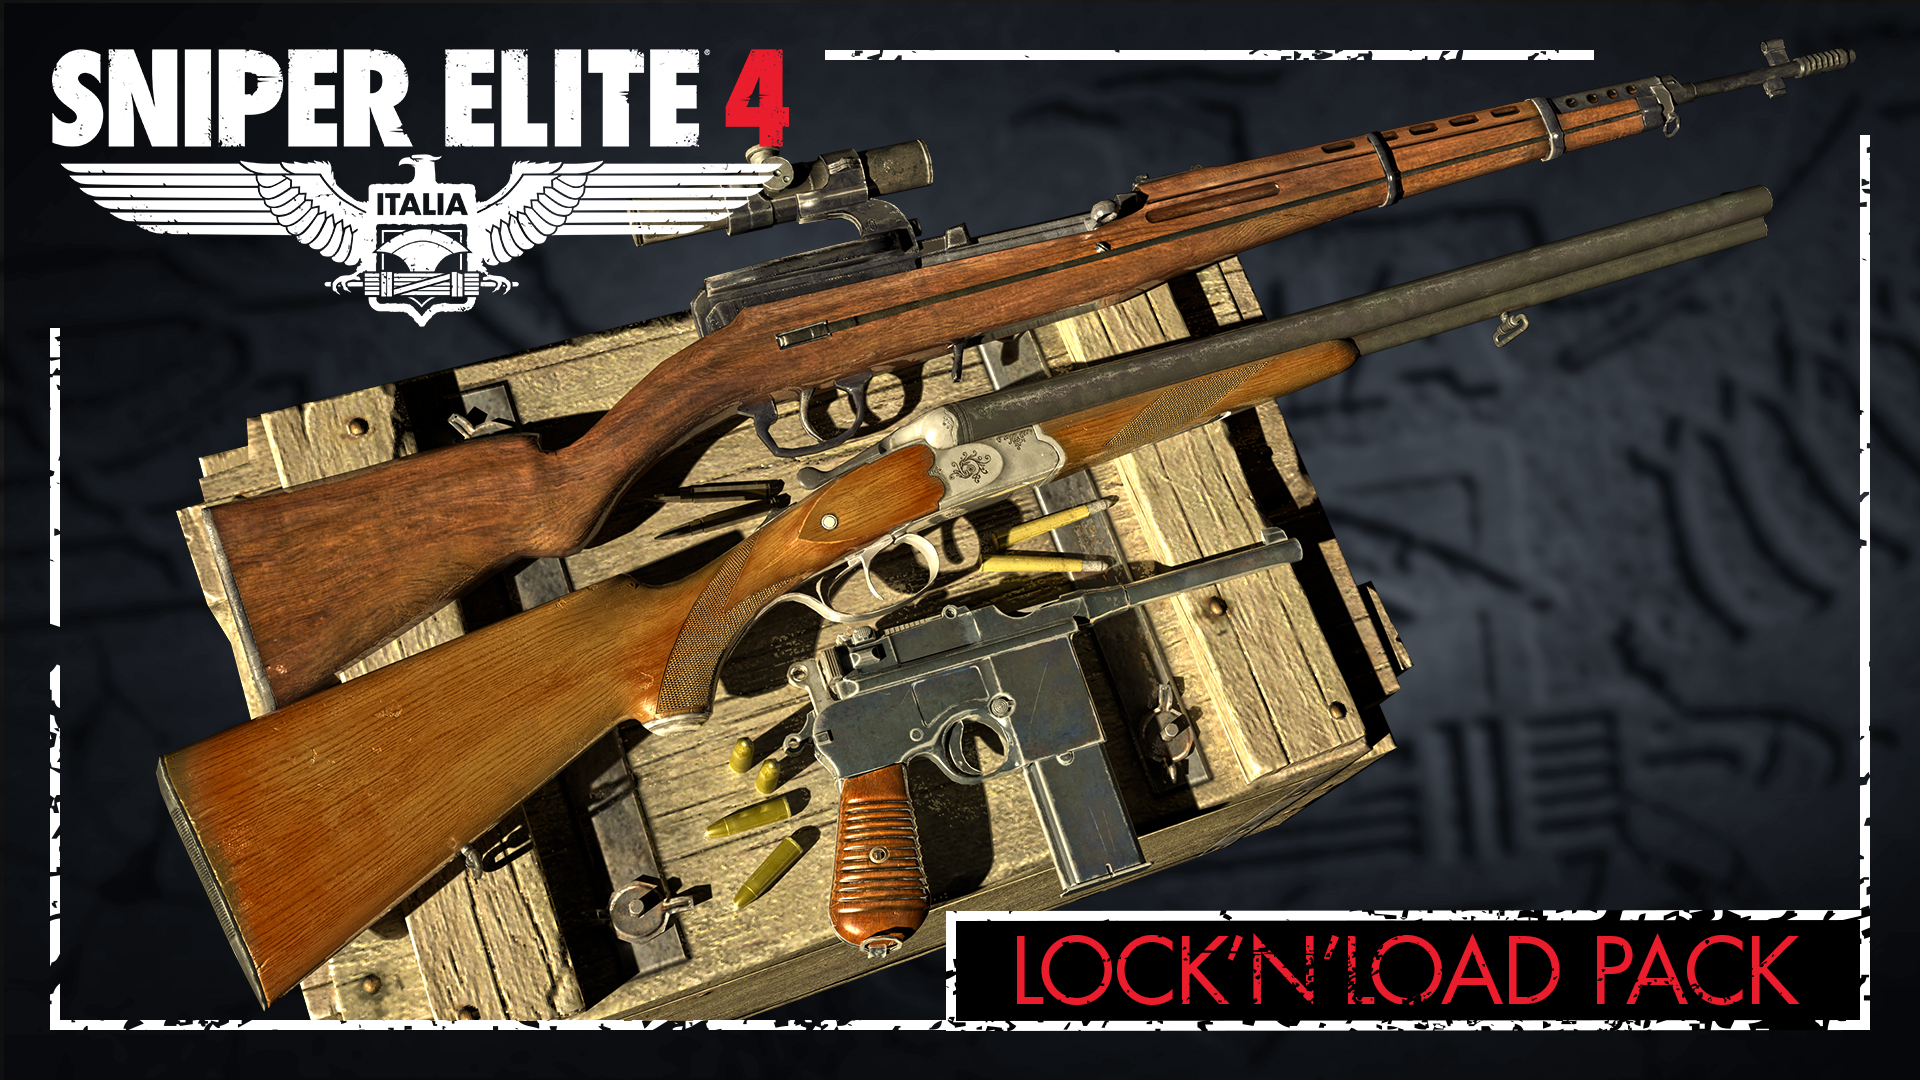 Sniper Elite 4 - Lock and Load Weapons Pack DLC Steam CD Key 4.51$